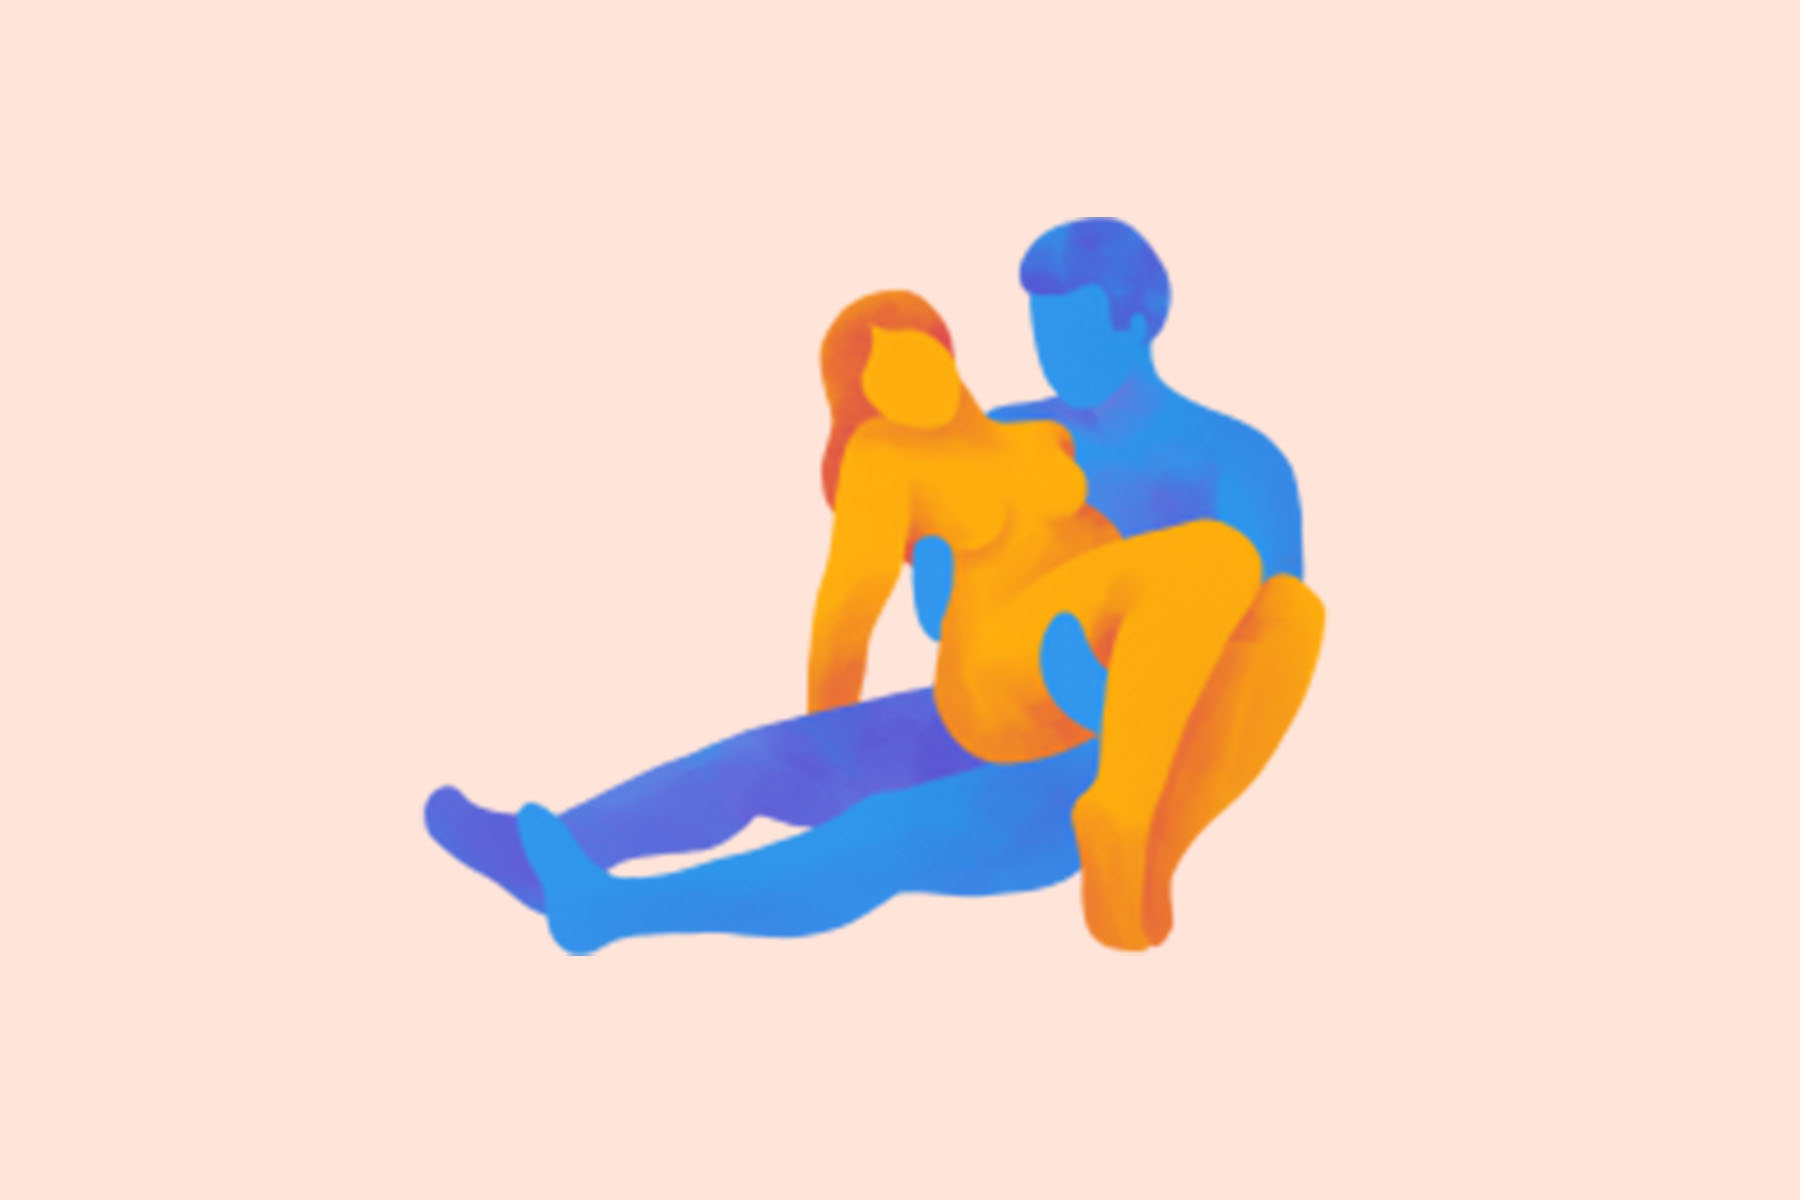 Sex positions and how to do it